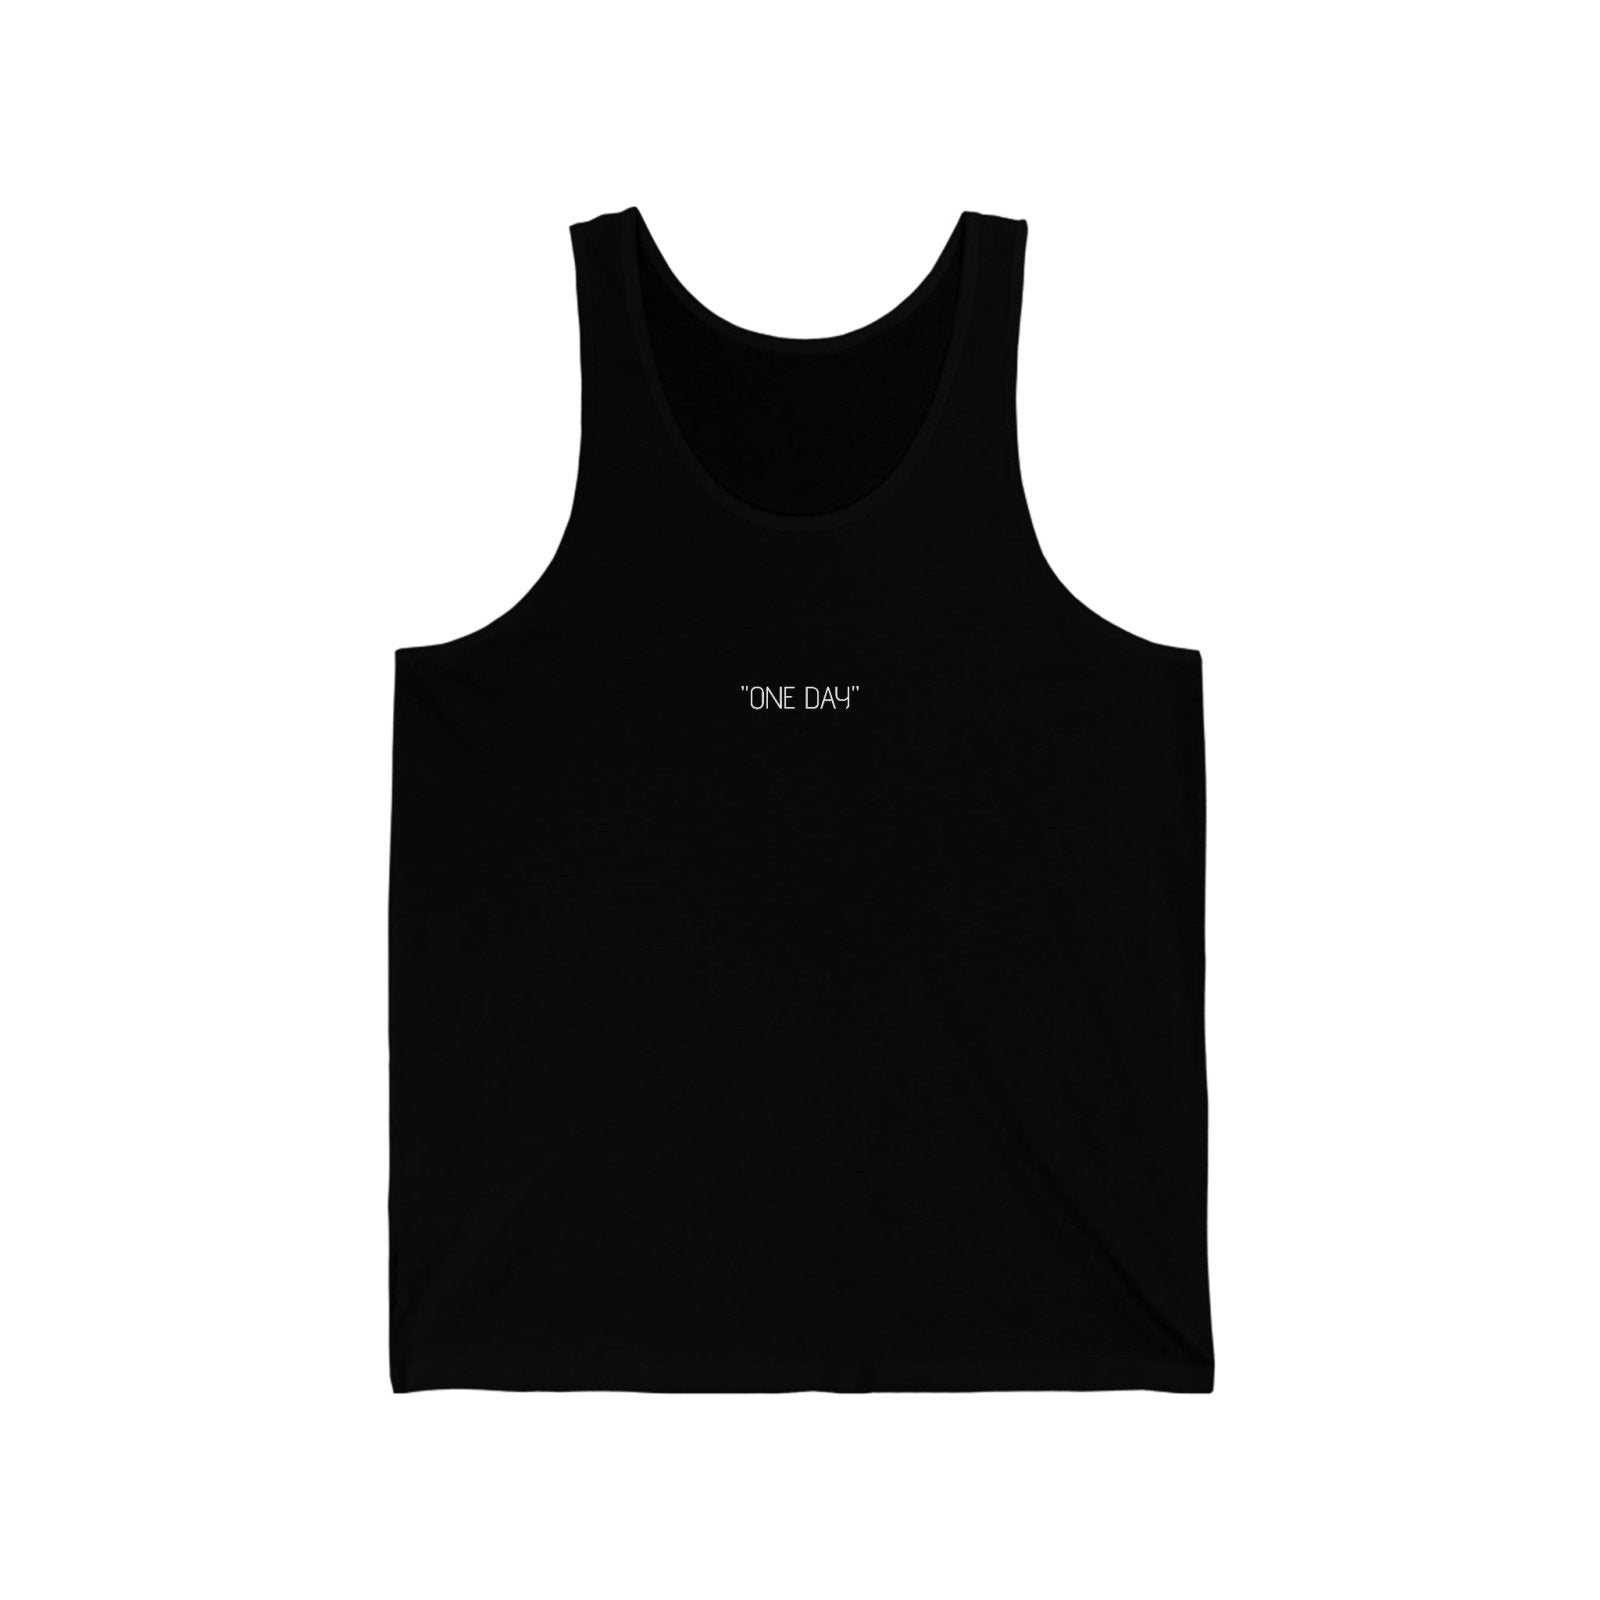 "ONE DAY" Motivational Jersey Tank - Dowding